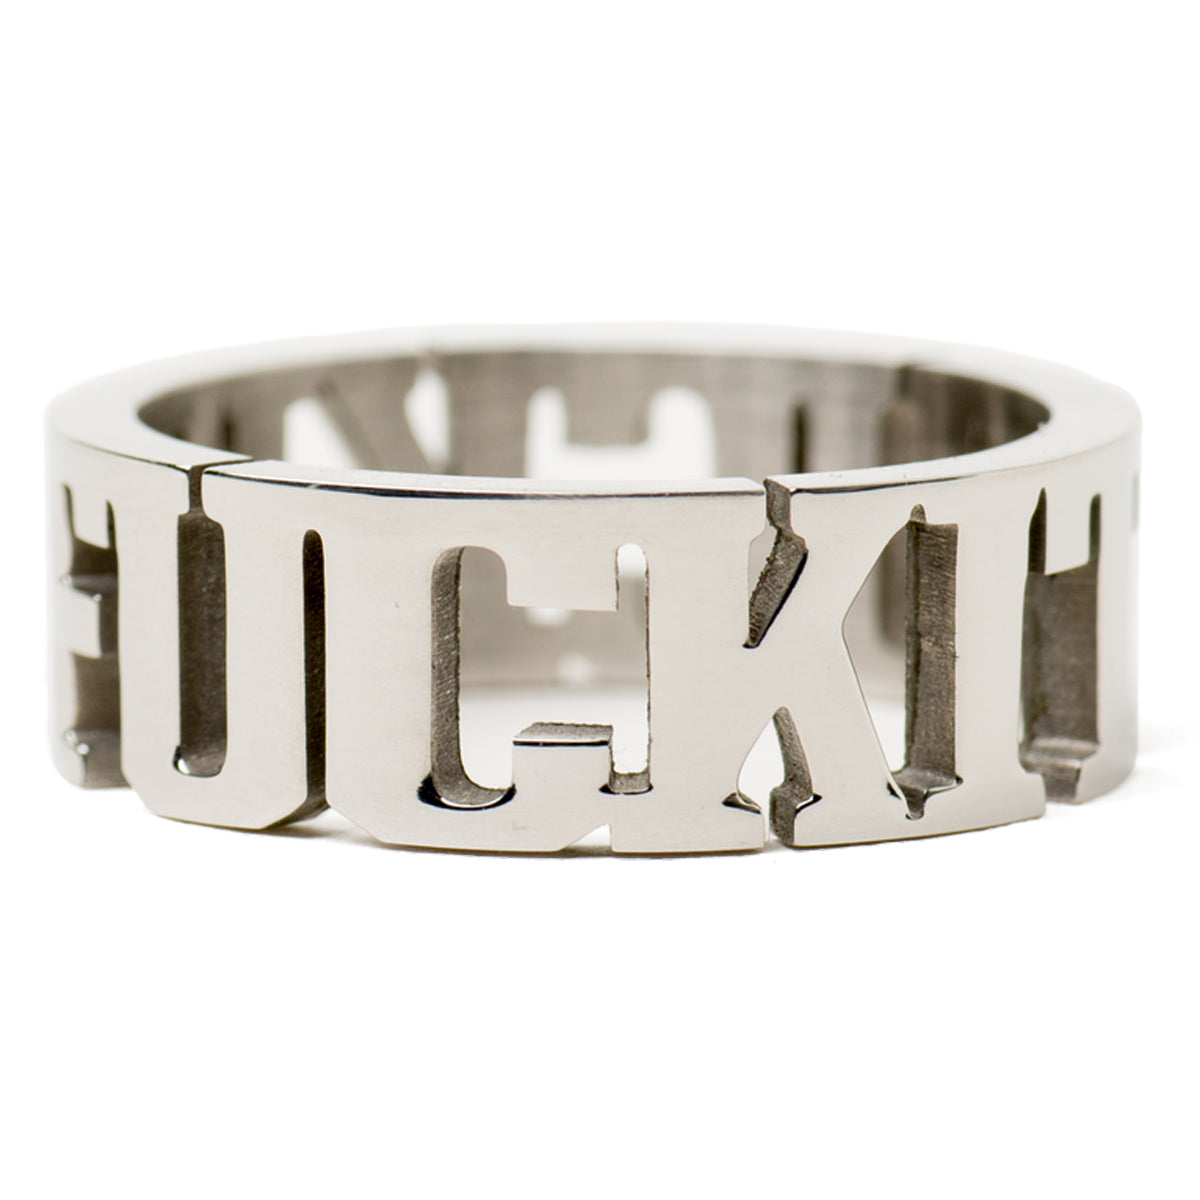 HUF Fuck It Ring - Silver image 1